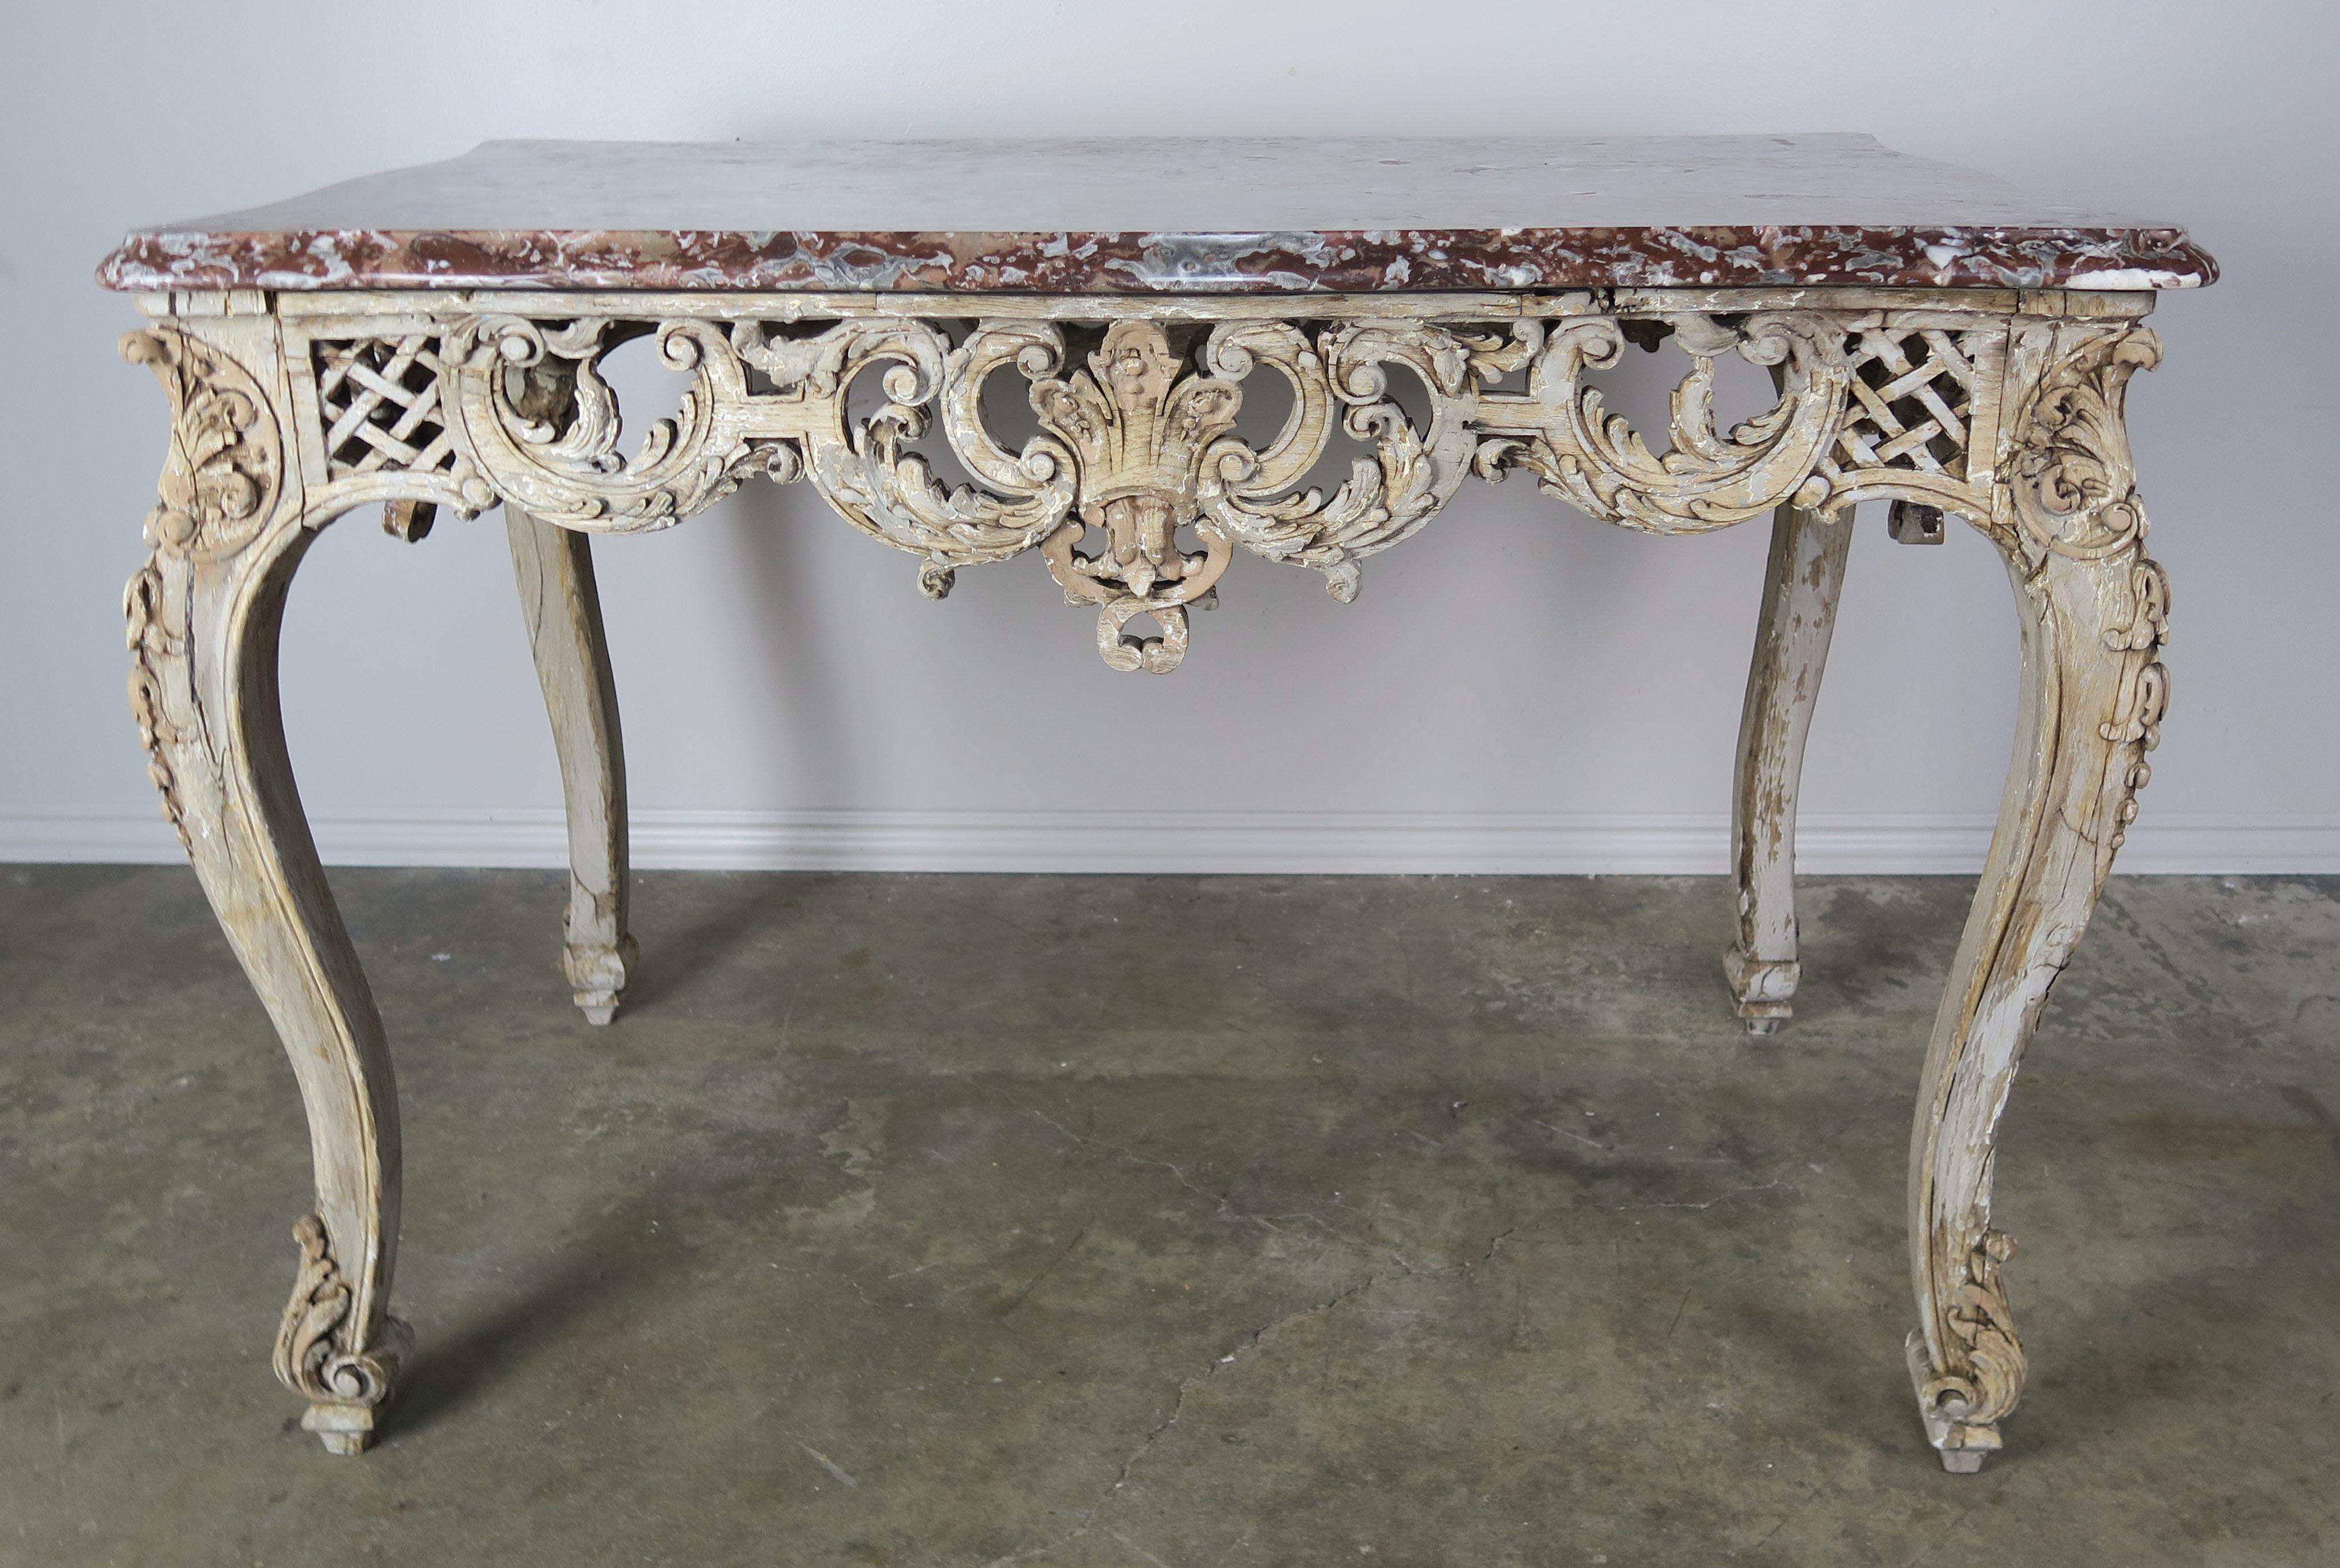 19th century French finely carved table standing on four cabriole legs with remnants of antique paint throughout. The table base holds the original rust colored marble top with a beautiful single ogee bullnose edge detail. Intricate carved details